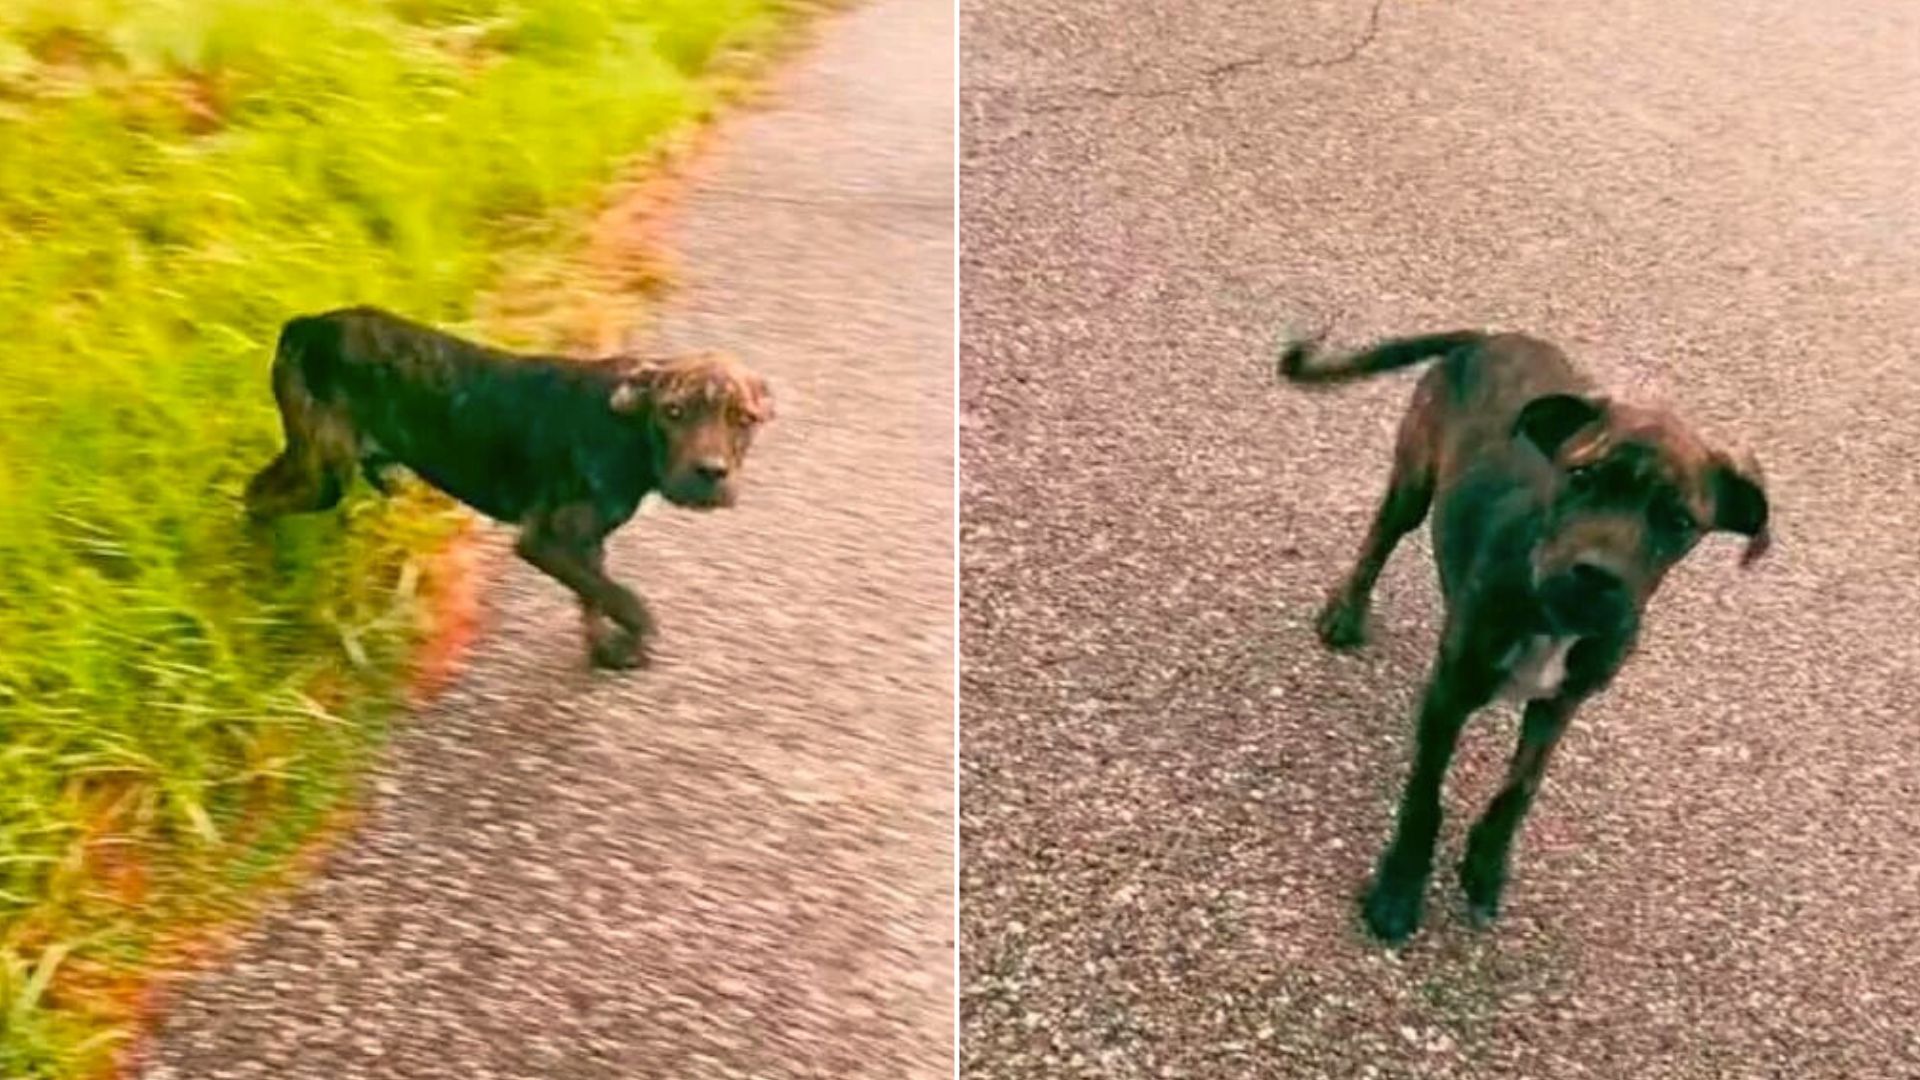 The Reason Behind This Dog Stopping A Woman’s Car Will Break Your Heart